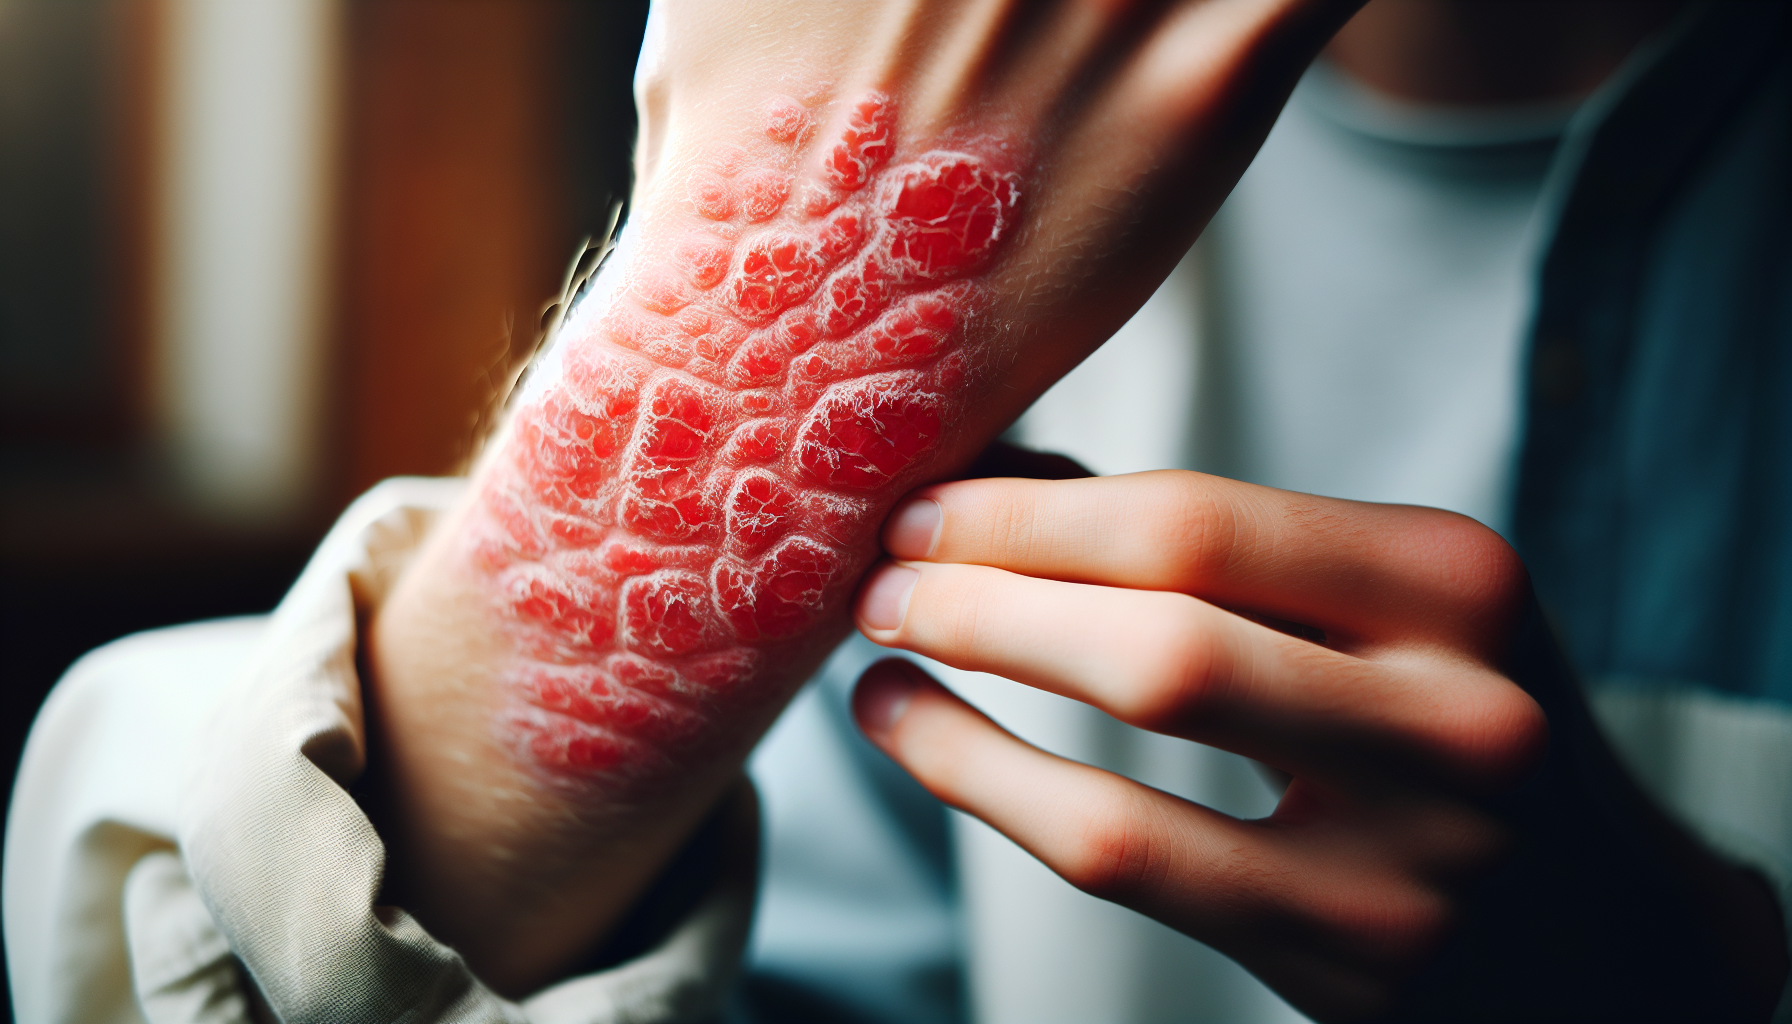 Does Eczema Increase Risk Of Other Diseases?